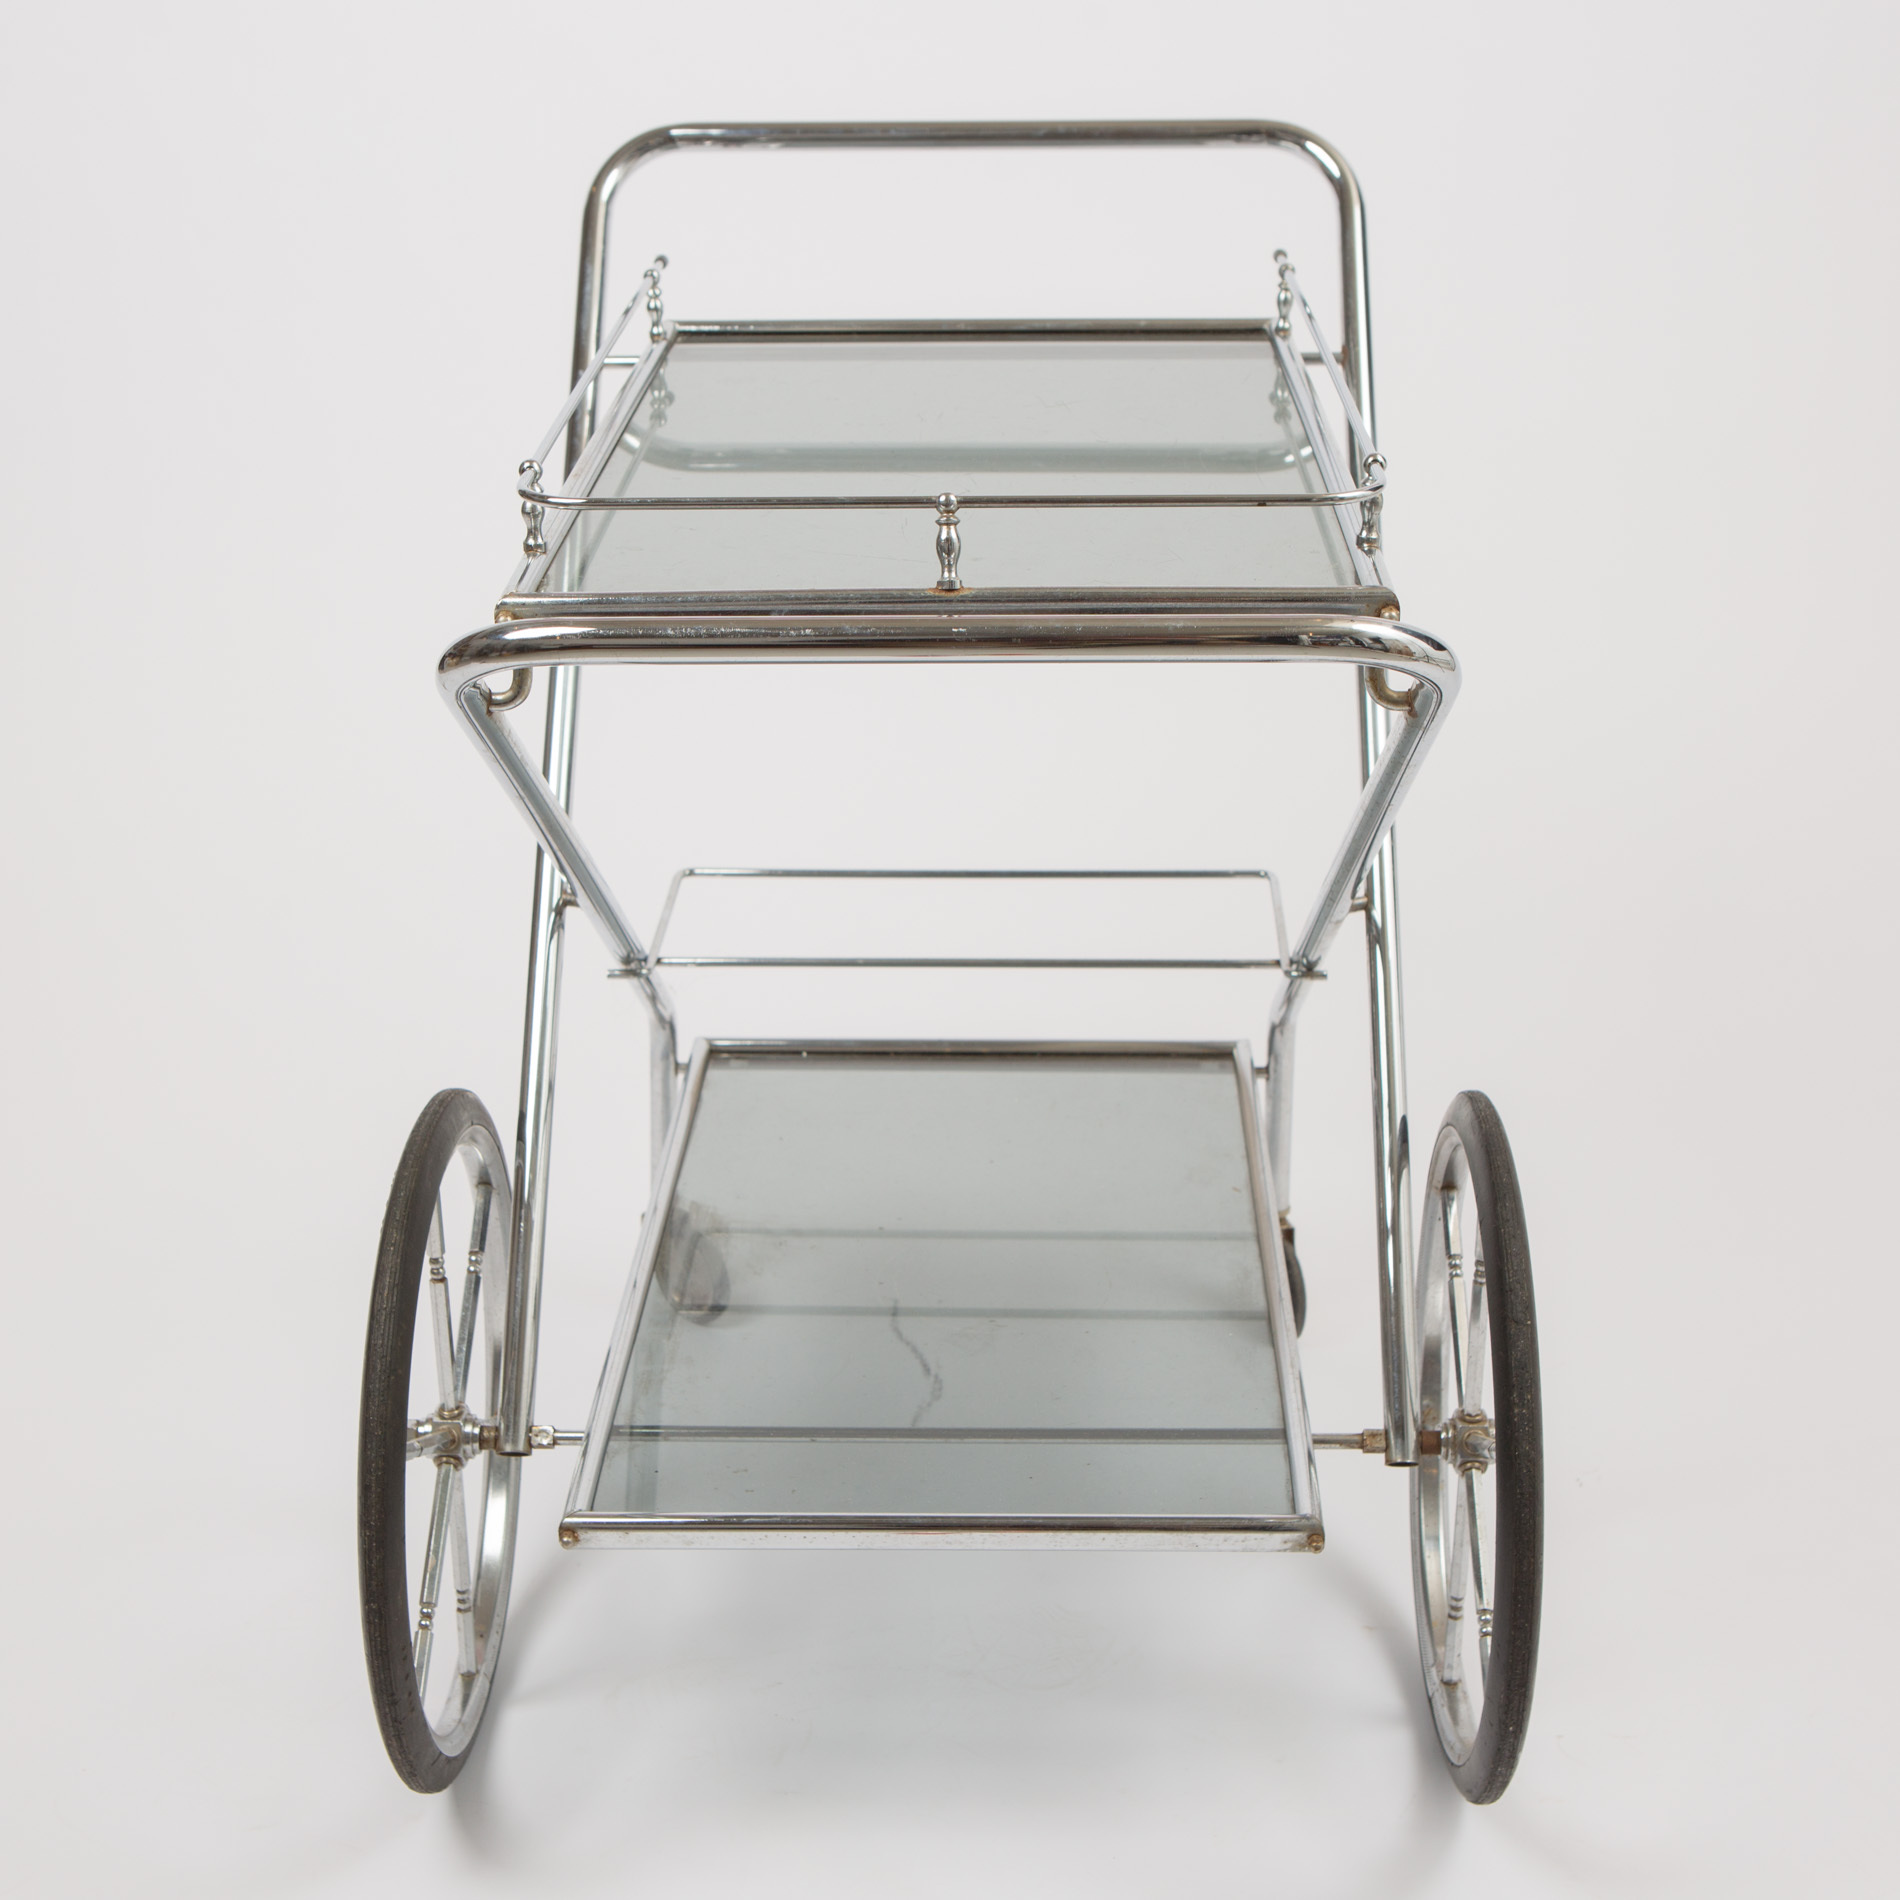 The image for Chrome Drinks Trolley00004